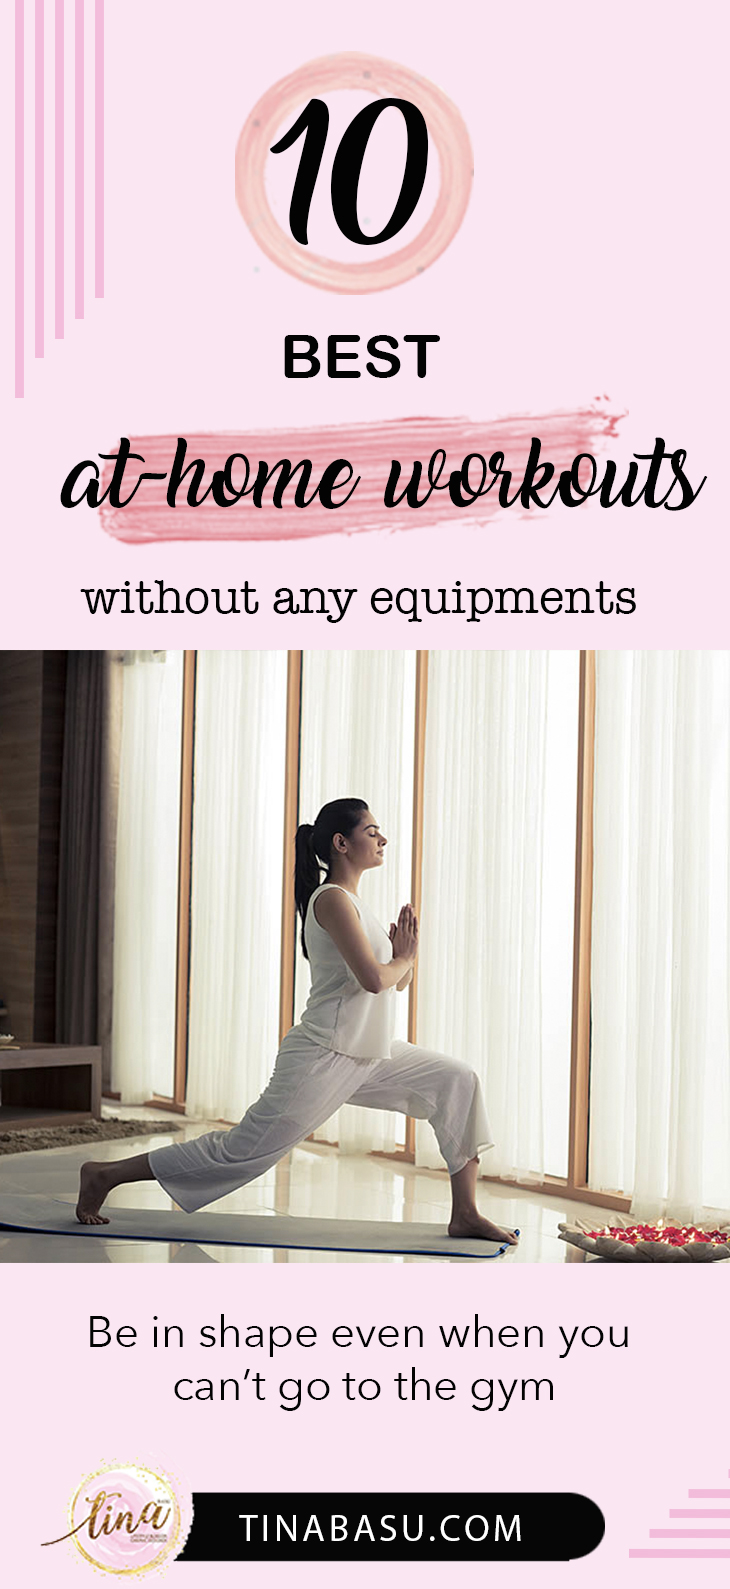 10 best home workouts without any equipments